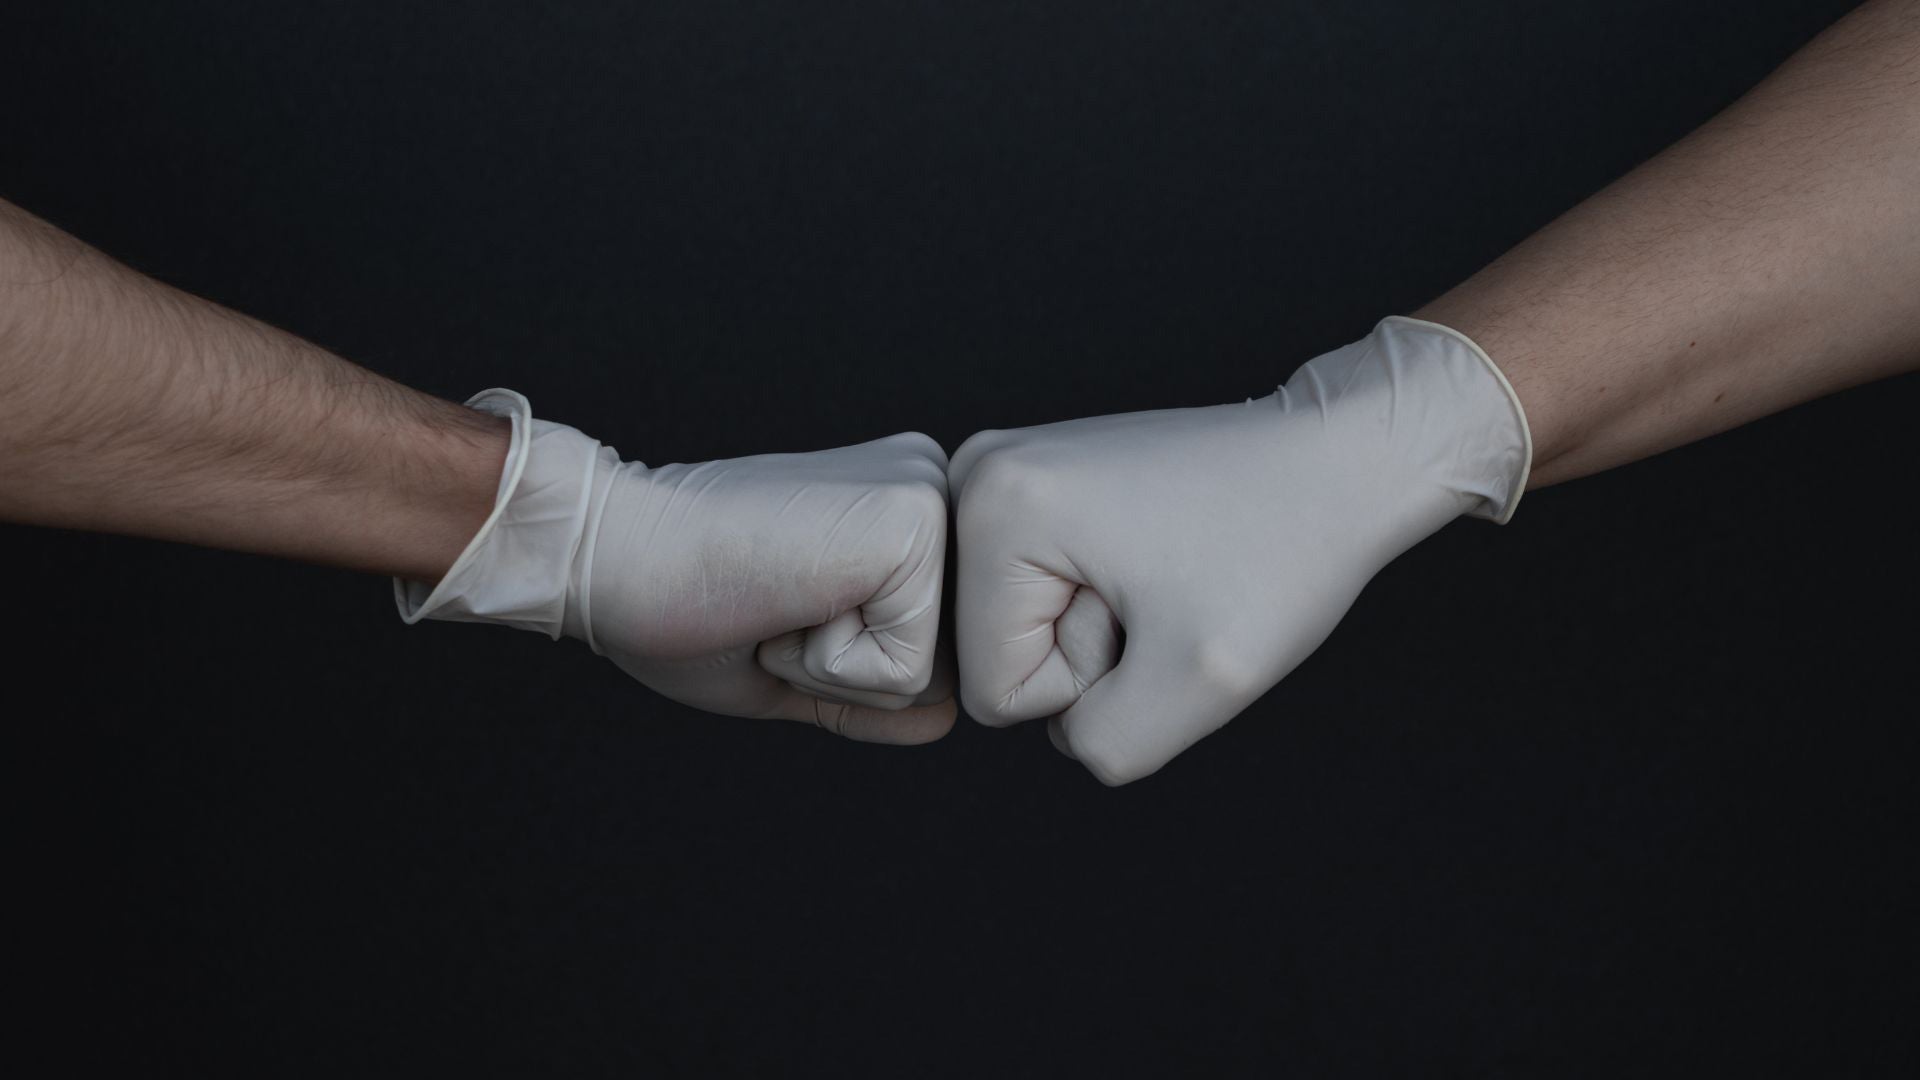 How Much Do Nitrile Gloves Cost? Nitrile Glove Pricing Explained